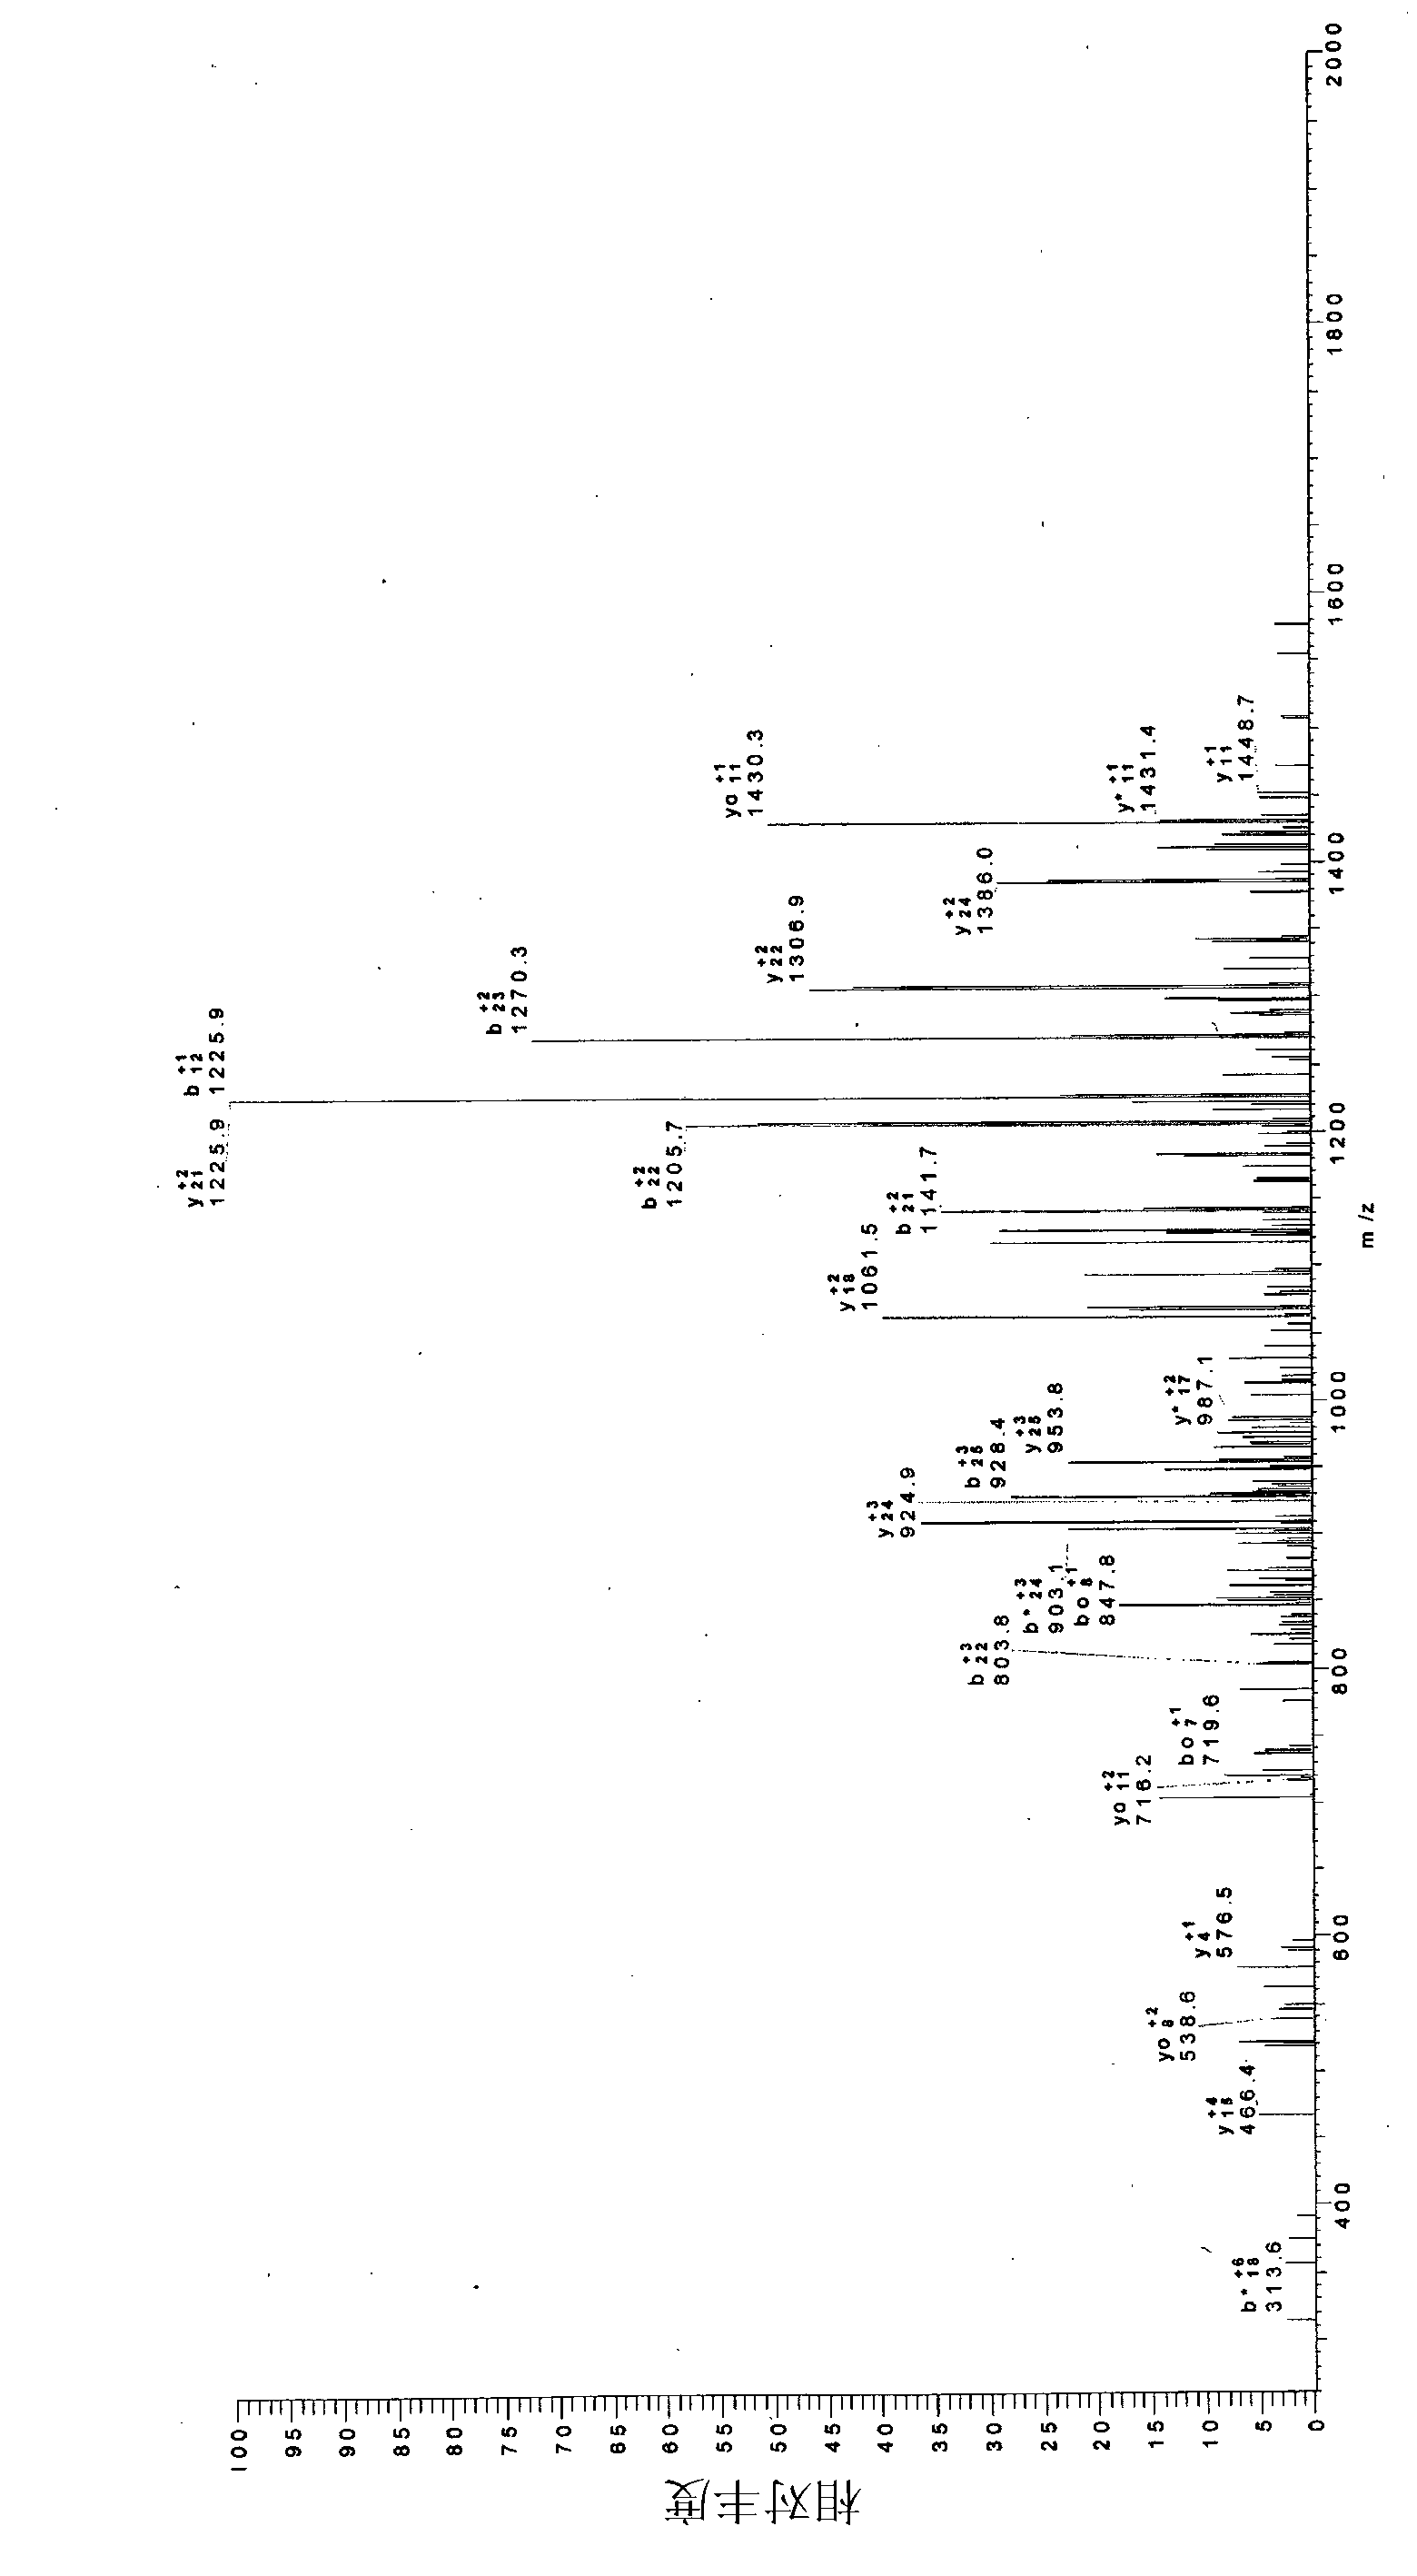 Process for the preparation of a biomass comprising plantaricin and uses thereof in medical field